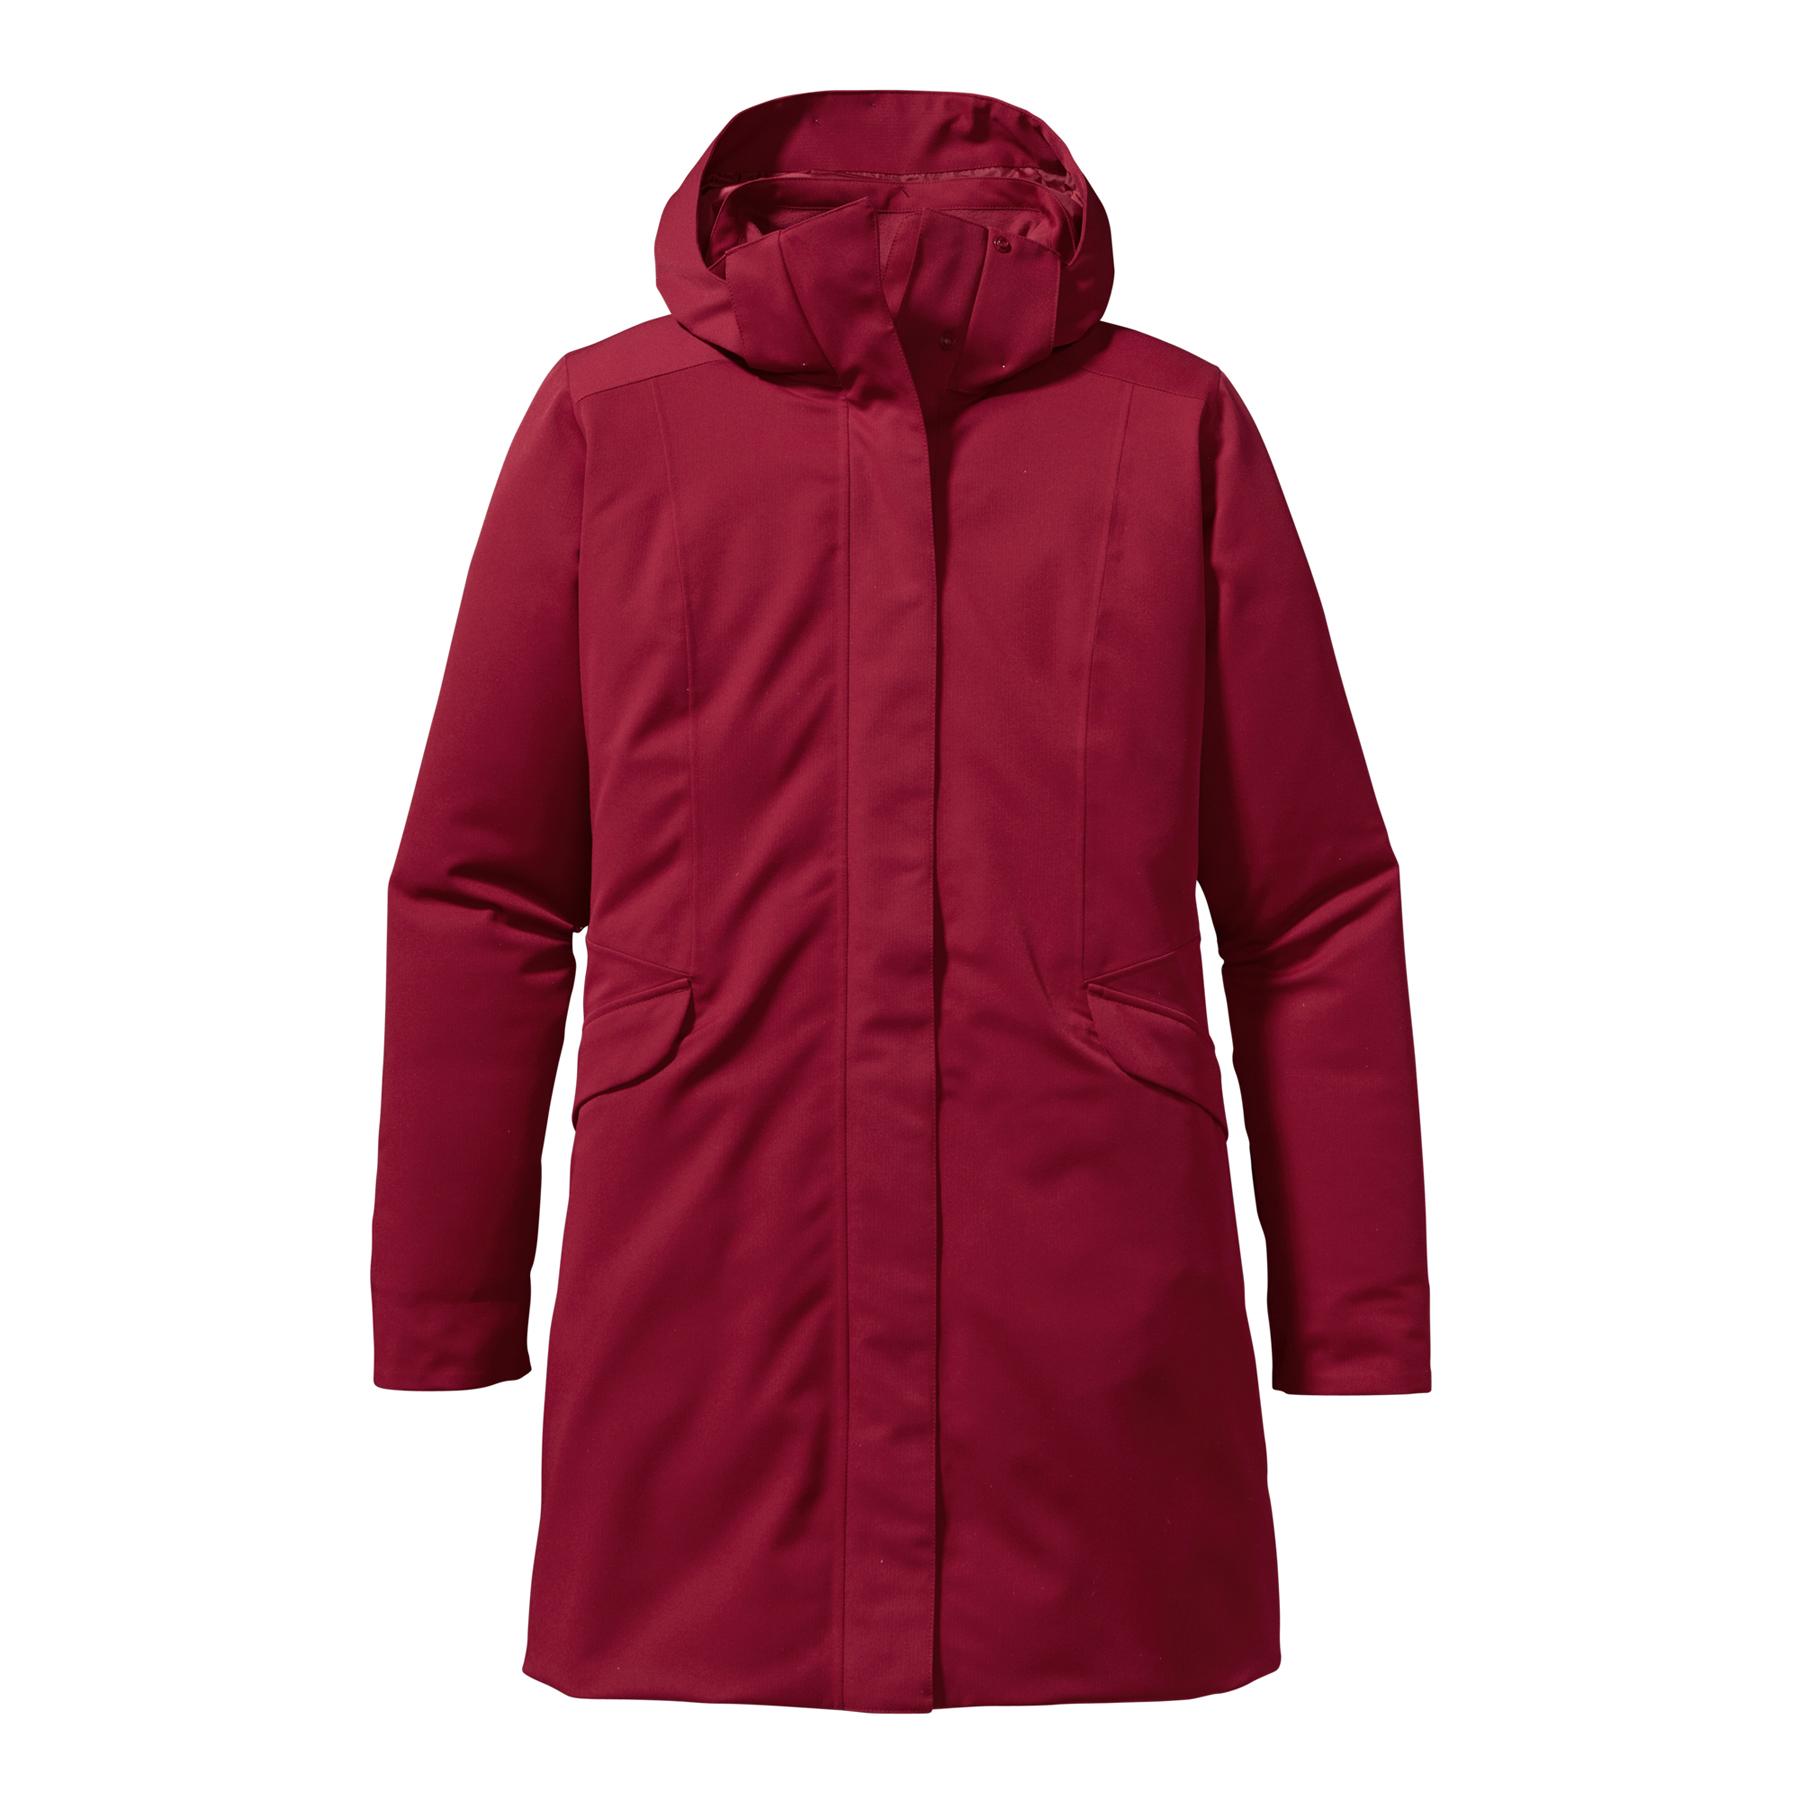 Foto Patagonia Duete Parka Lady Wax Red (Modell 2013/2014) foto 611160